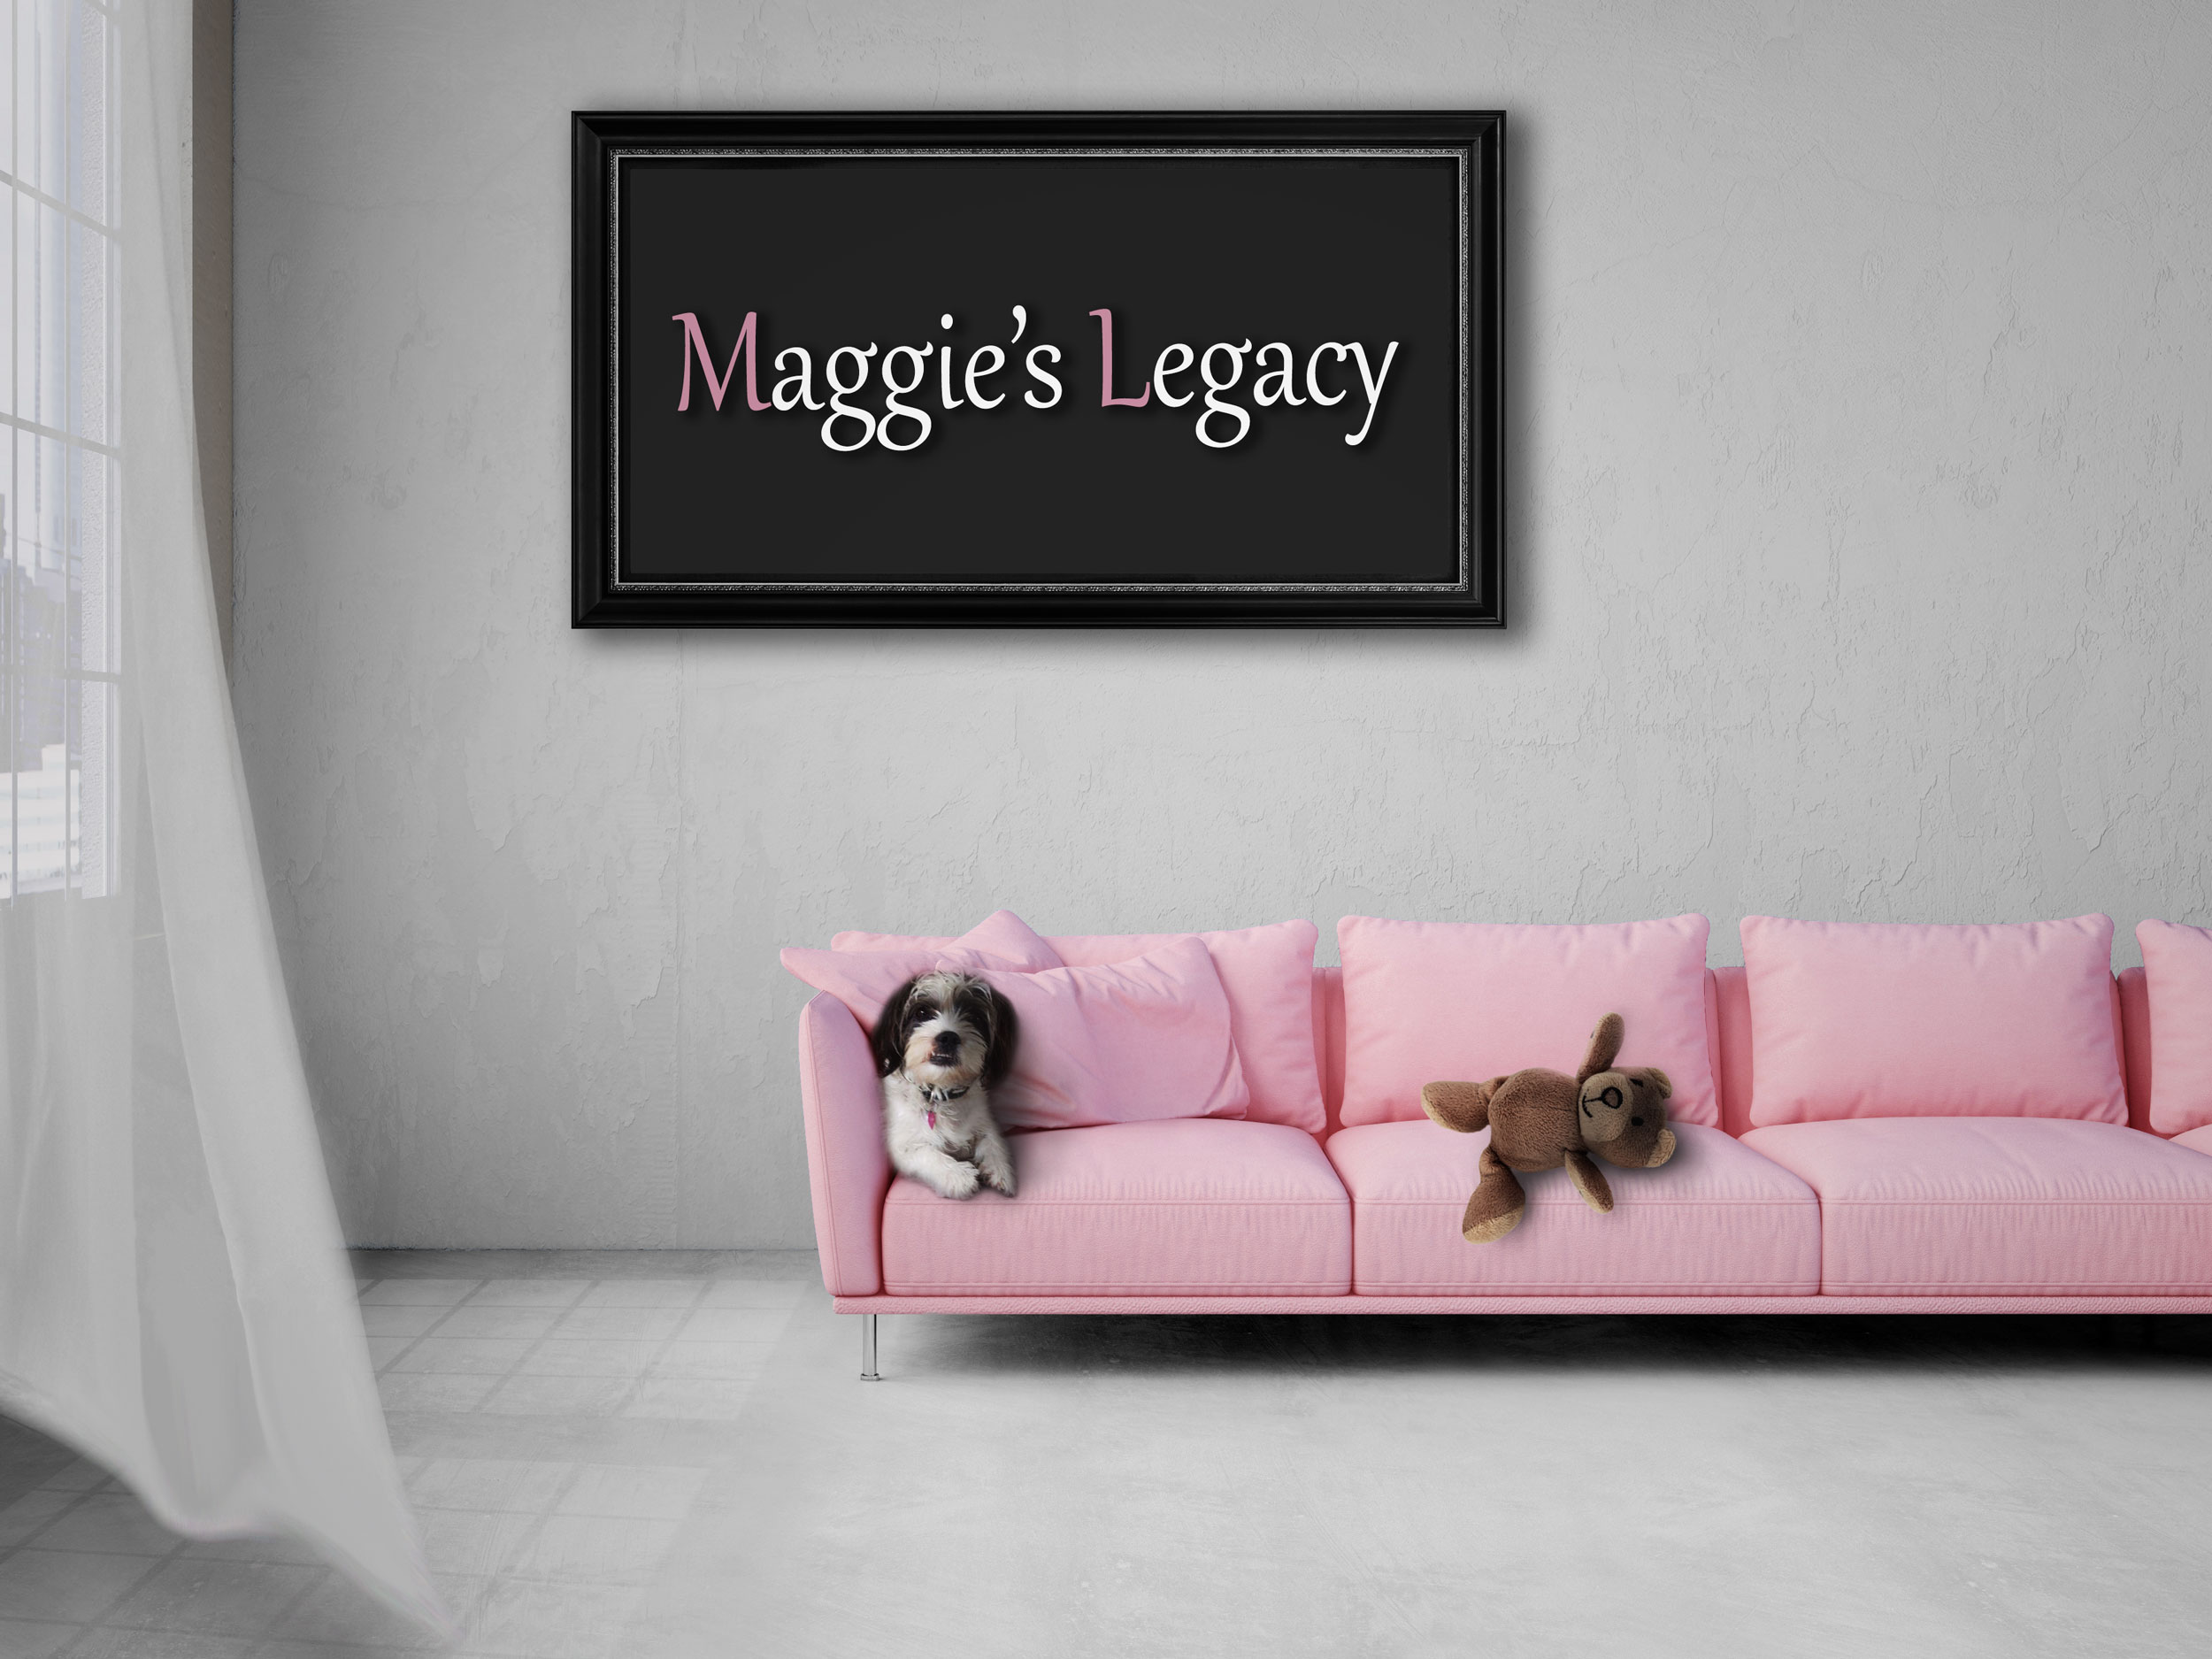 maggies-legacy-banner